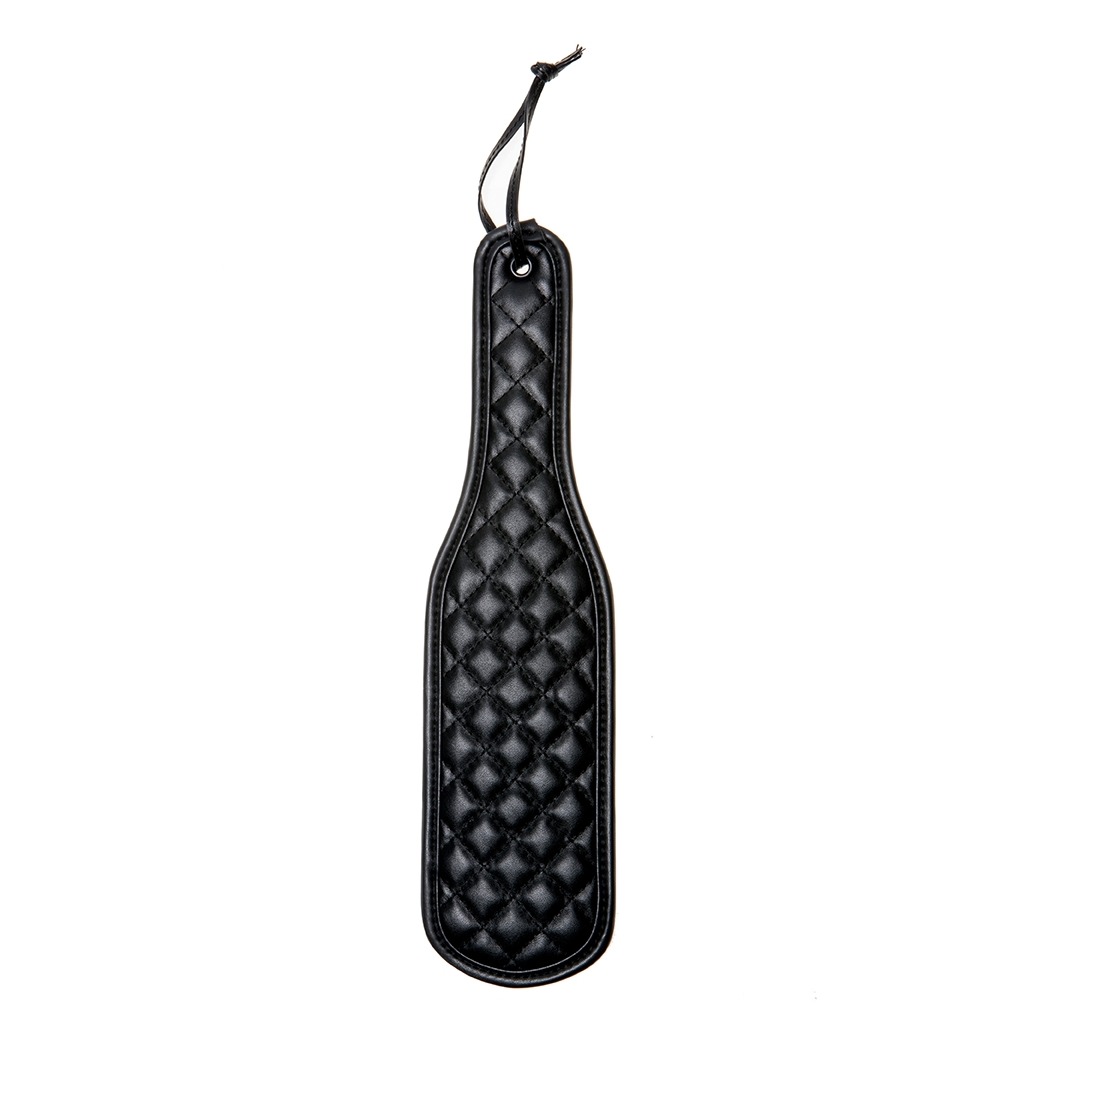 X-Play quilted paddle - Black